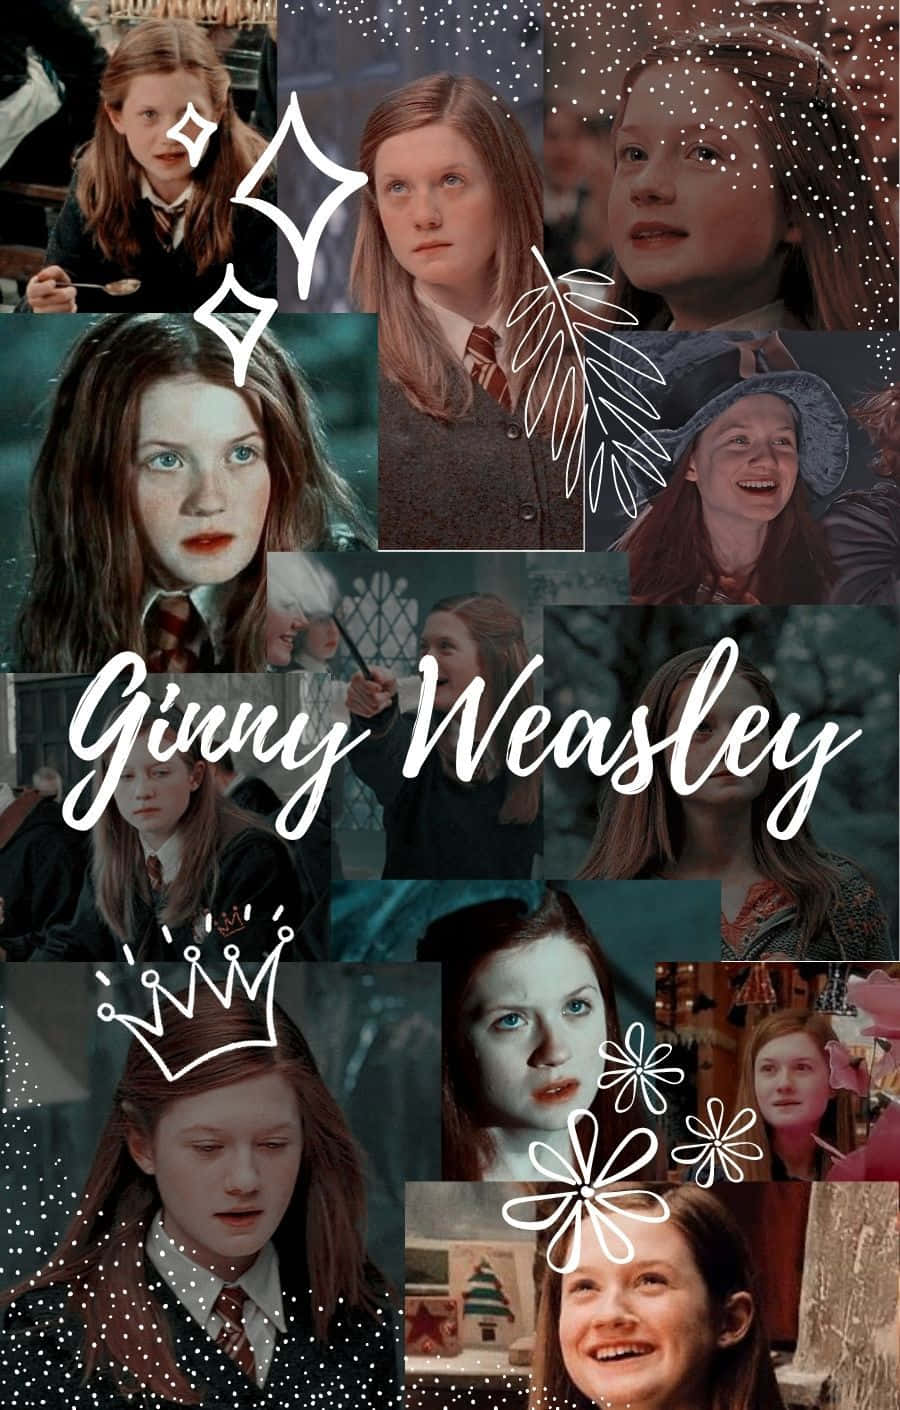 Ginny Weasley with a determined and confident gaze Wallpaper